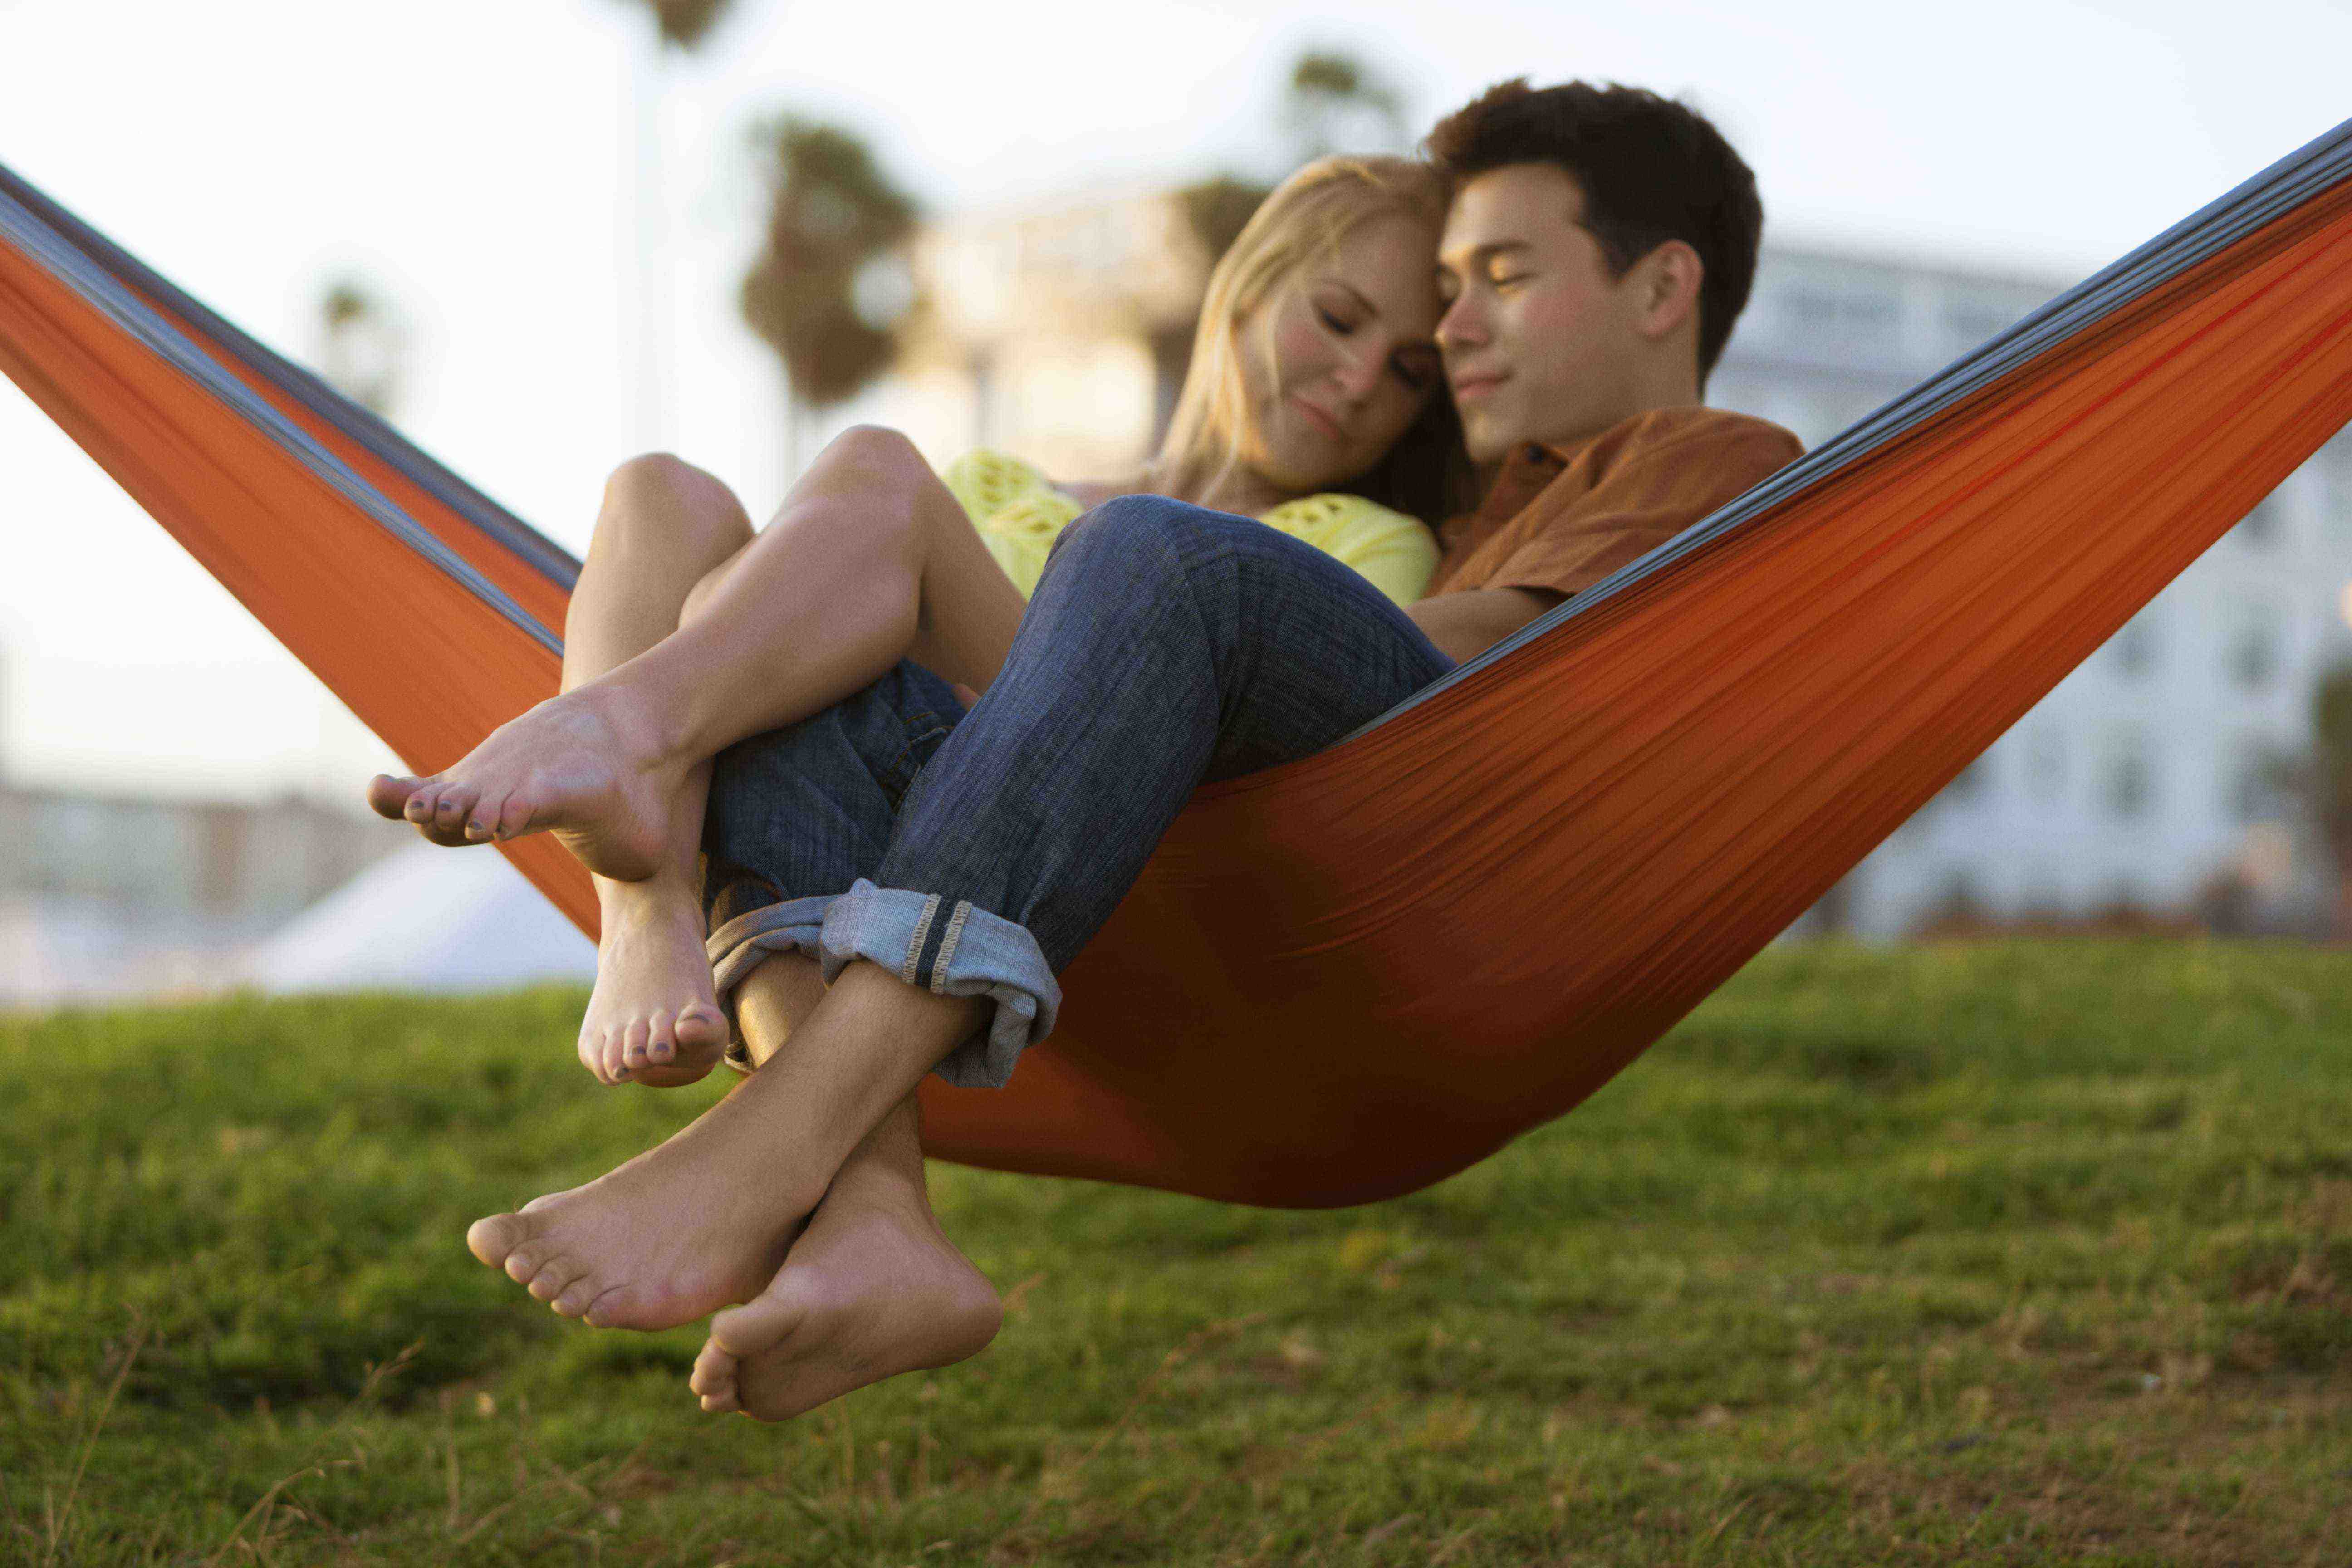 A man and woman are snuggling in a hammock